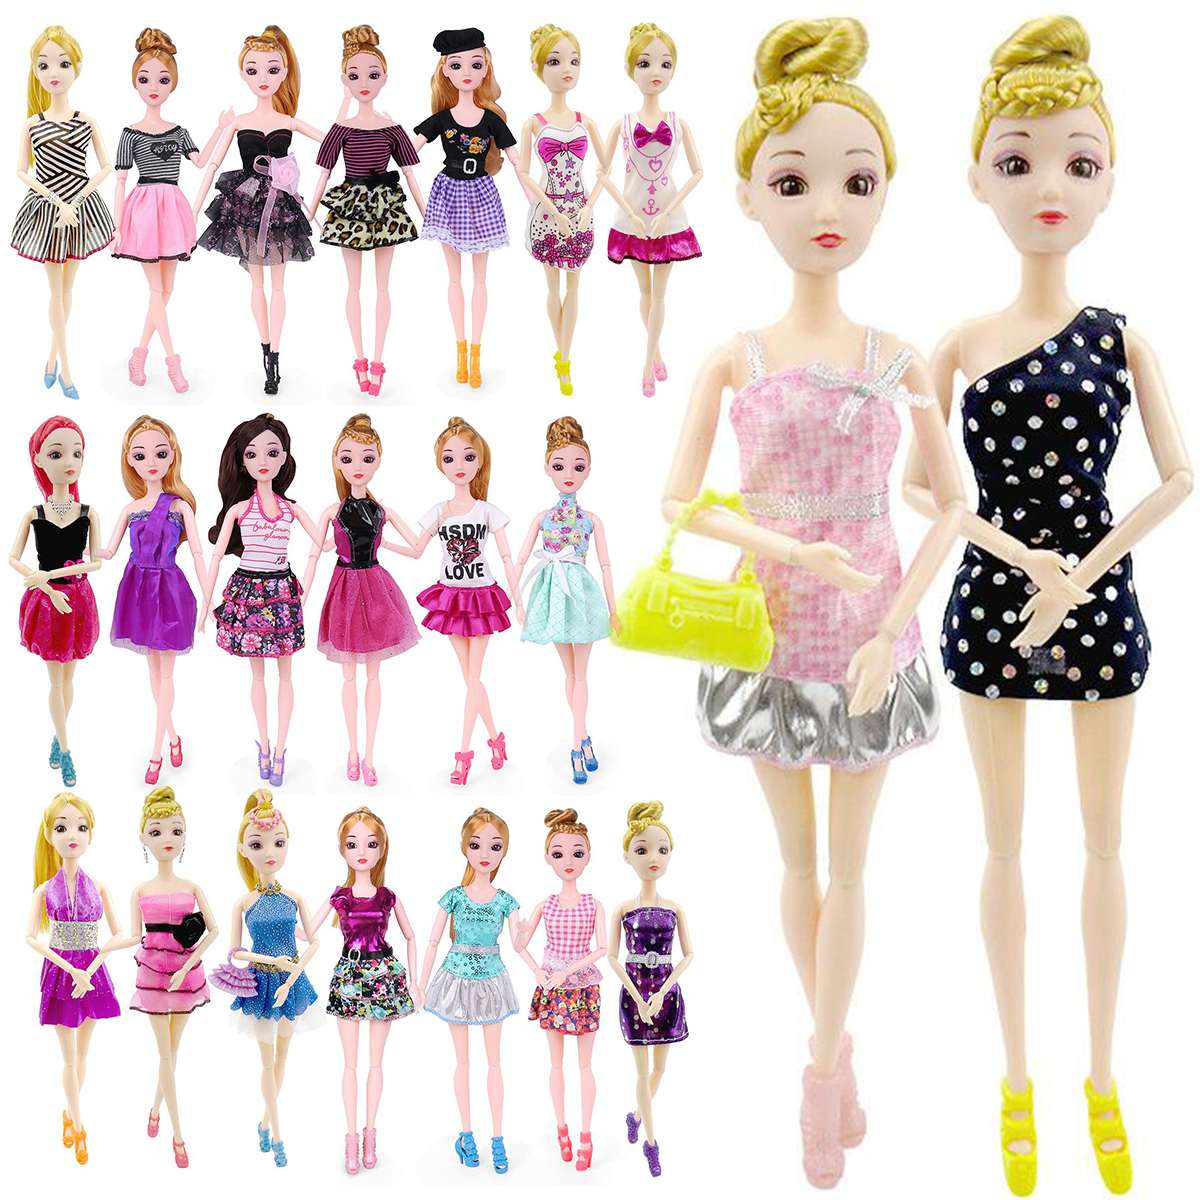 22pcs/set Fashion Casual Party Dress Wedding Gown For Barbie Dolls ...